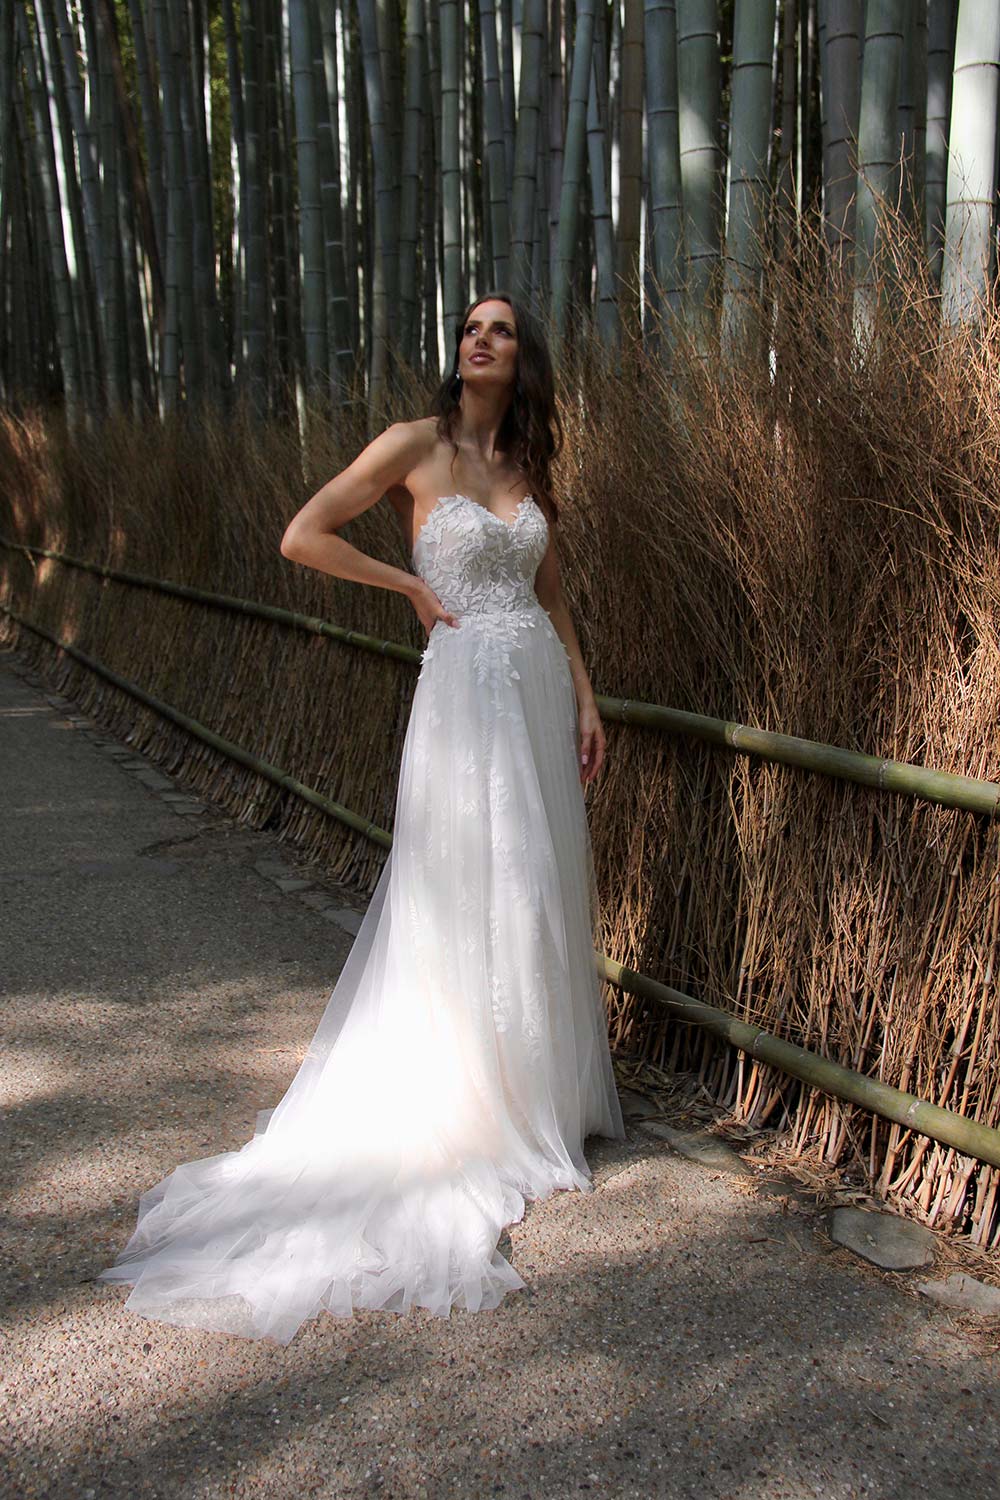 Female model wearing Vinka Design An Oriental Affair Wedding Dress. In a Japanese bamboo forest the front detail of gown with a strapless bodice with leaf lace and a full length train skirt